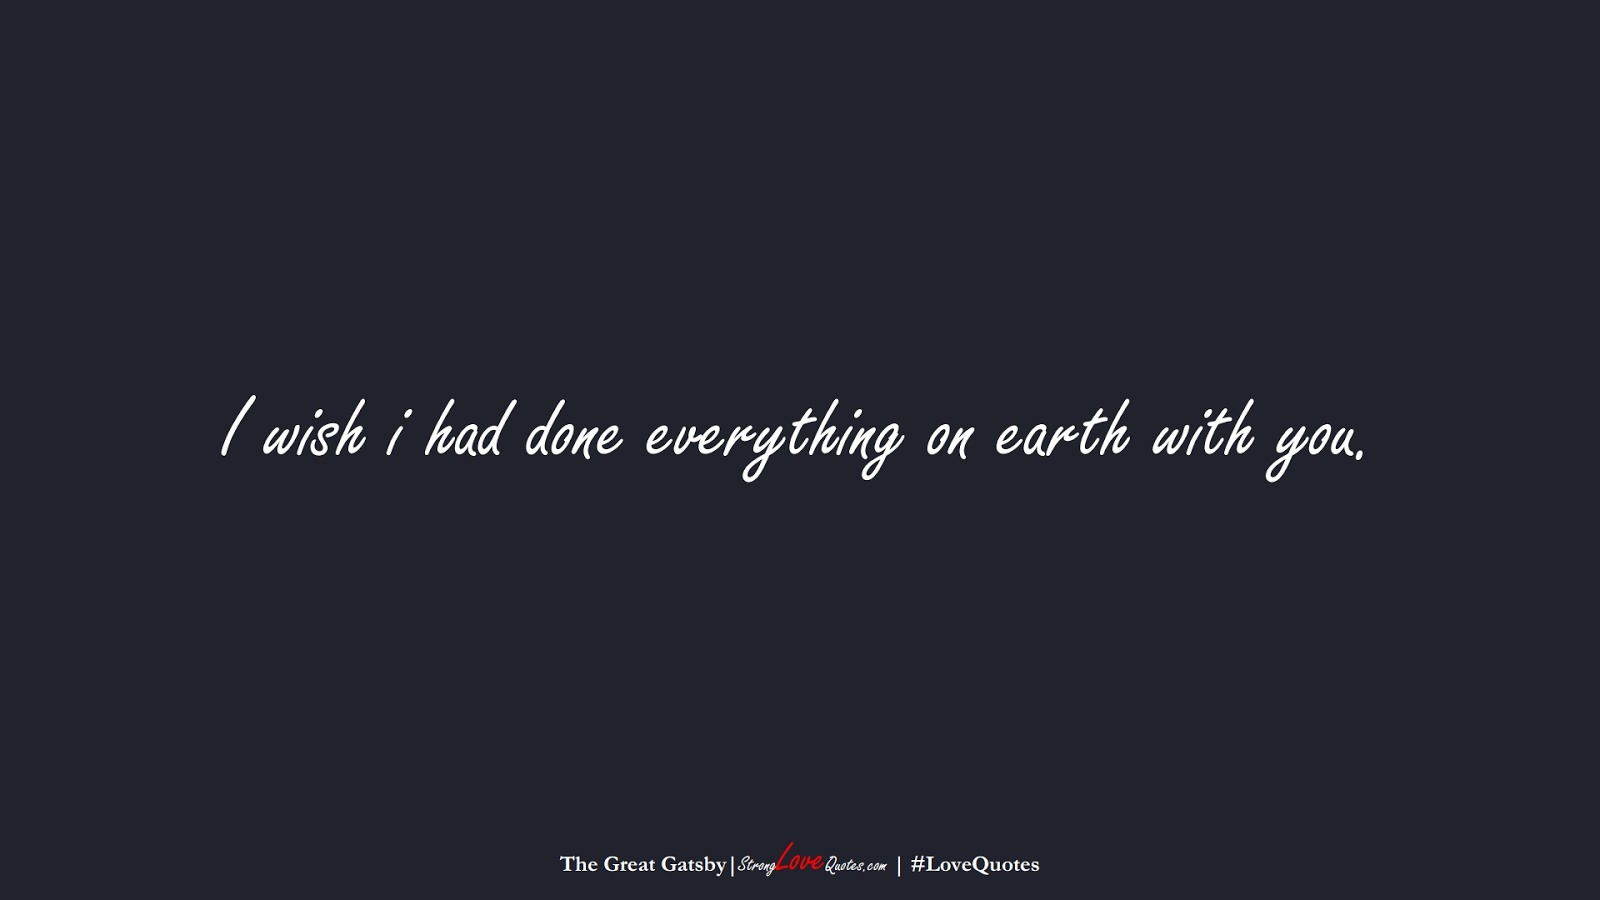 I wish i had done everything on earth with you. (The Great Gatsby);  #LoveQuotes